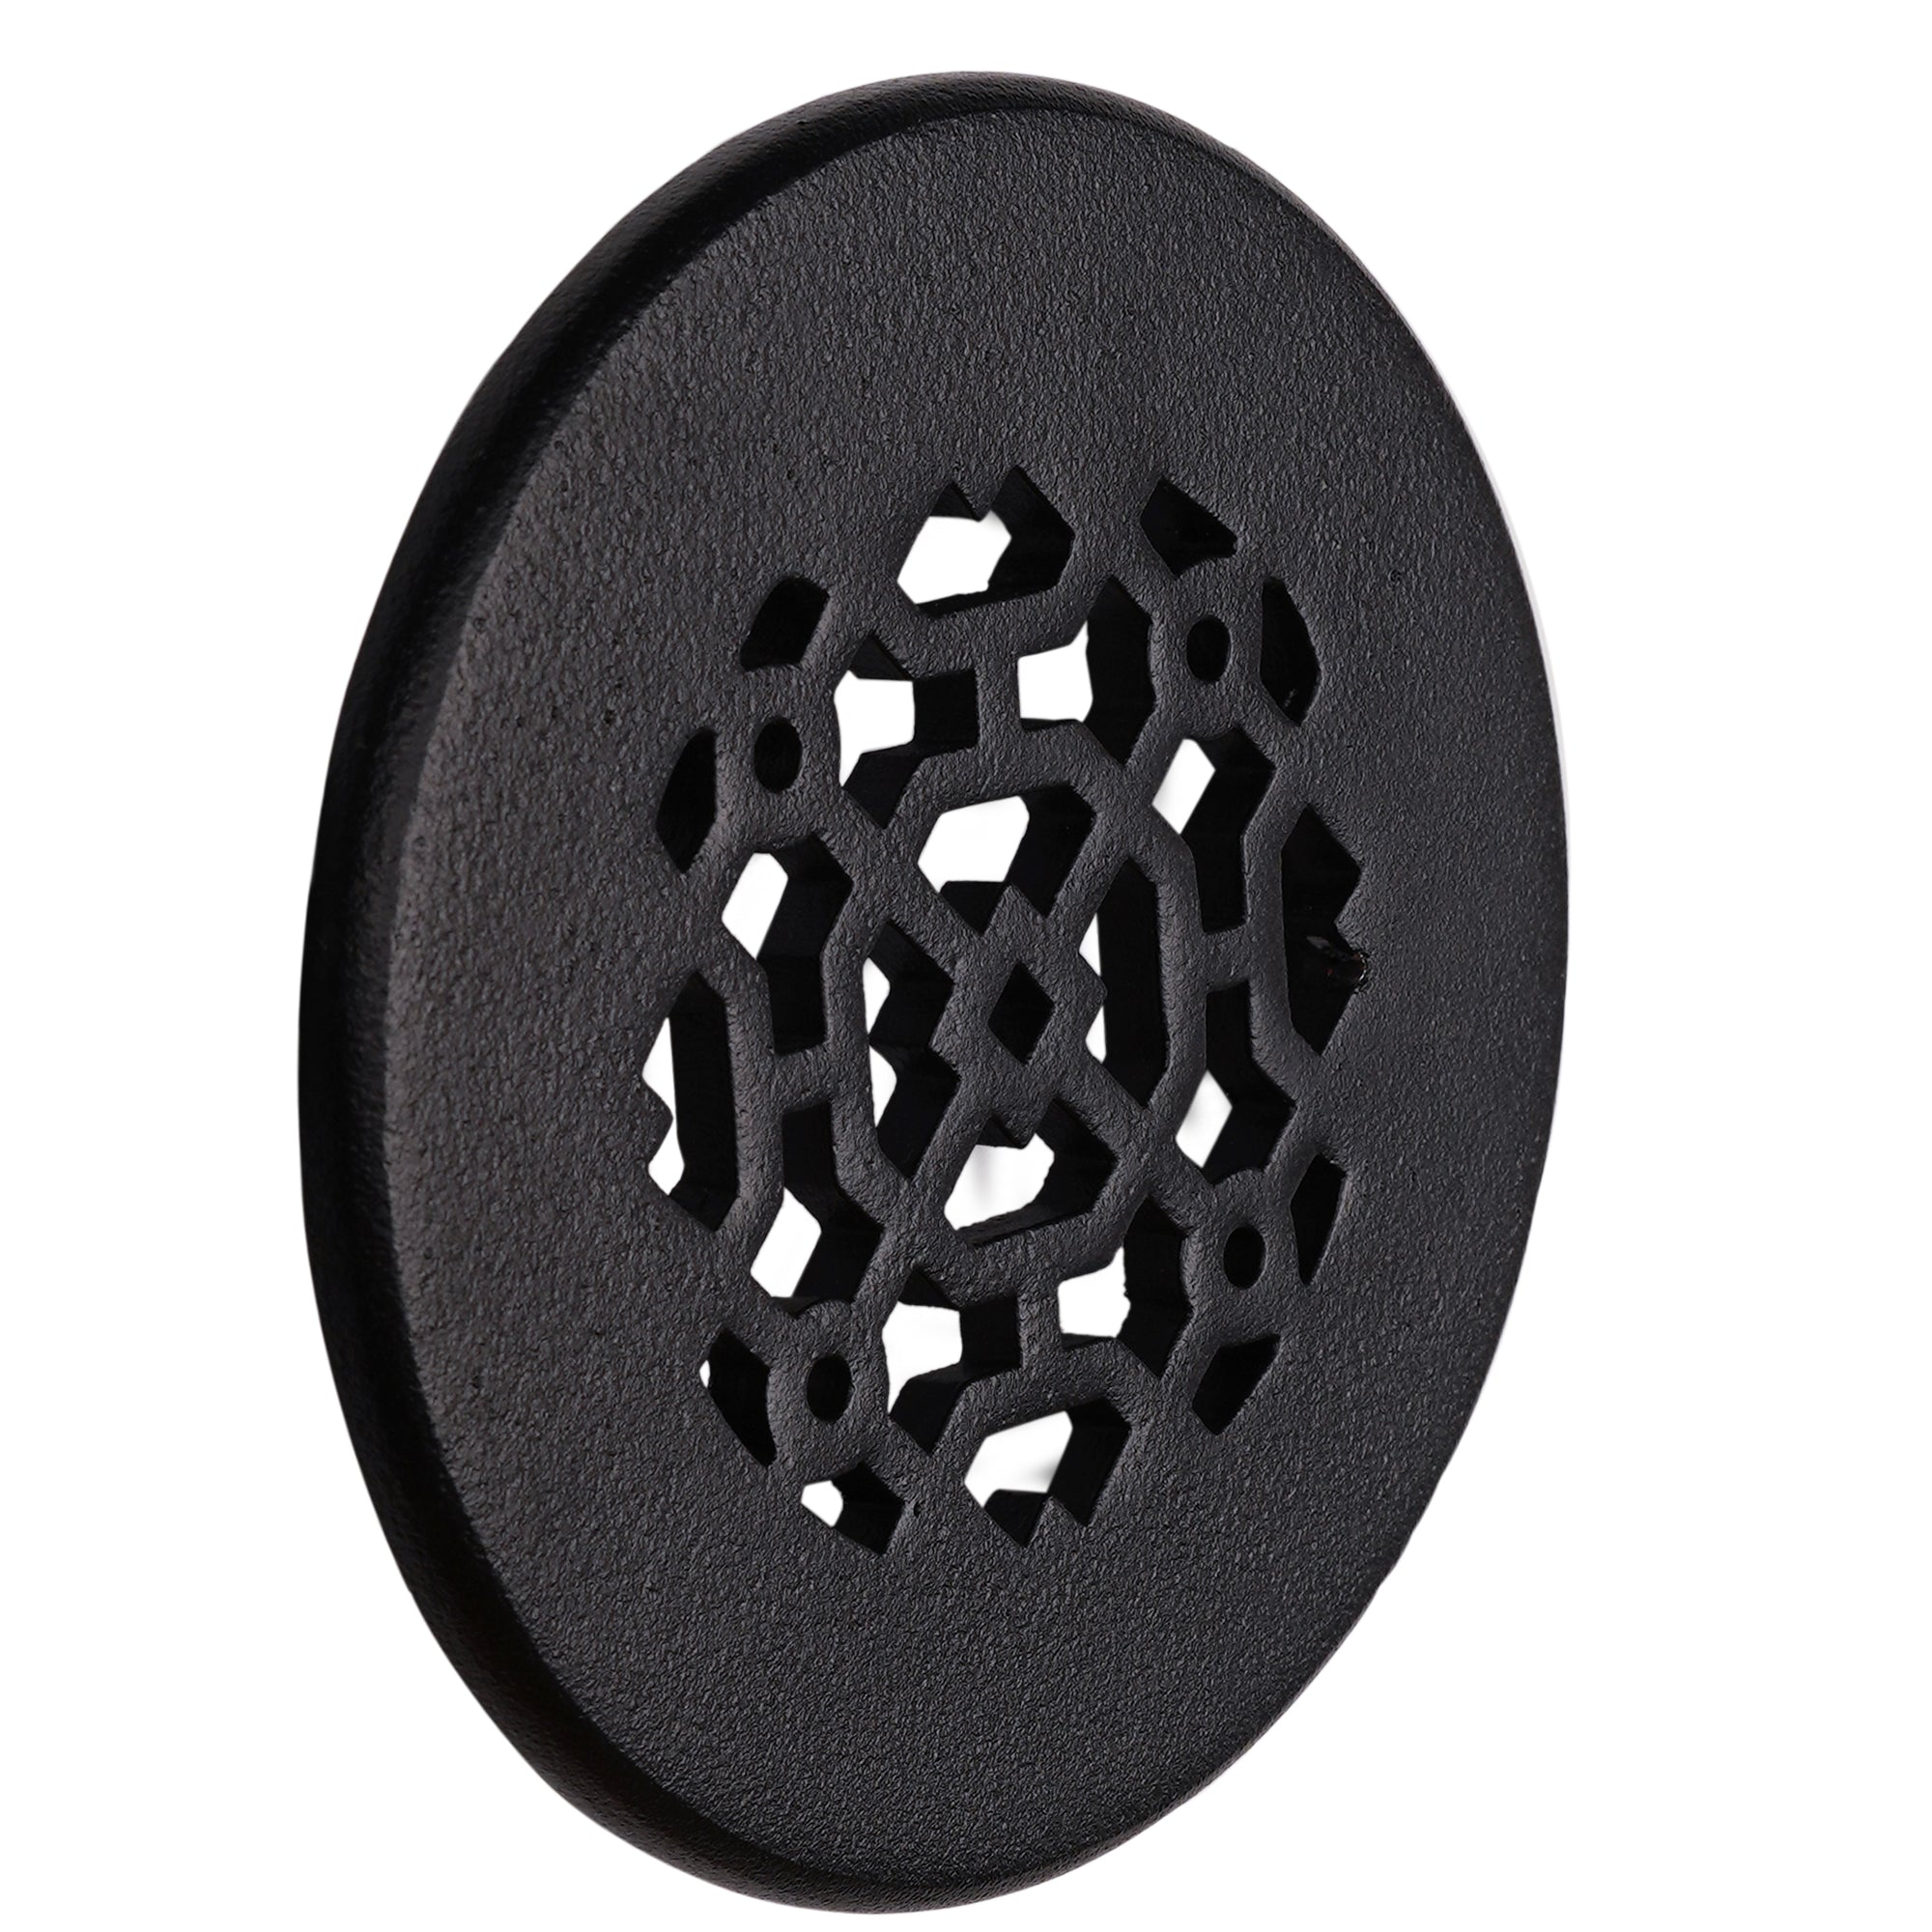 Achtek 4.5" Duct opening Solid Cast Aluminum Round Grille ( 6" Round Overall) | Powder Coated